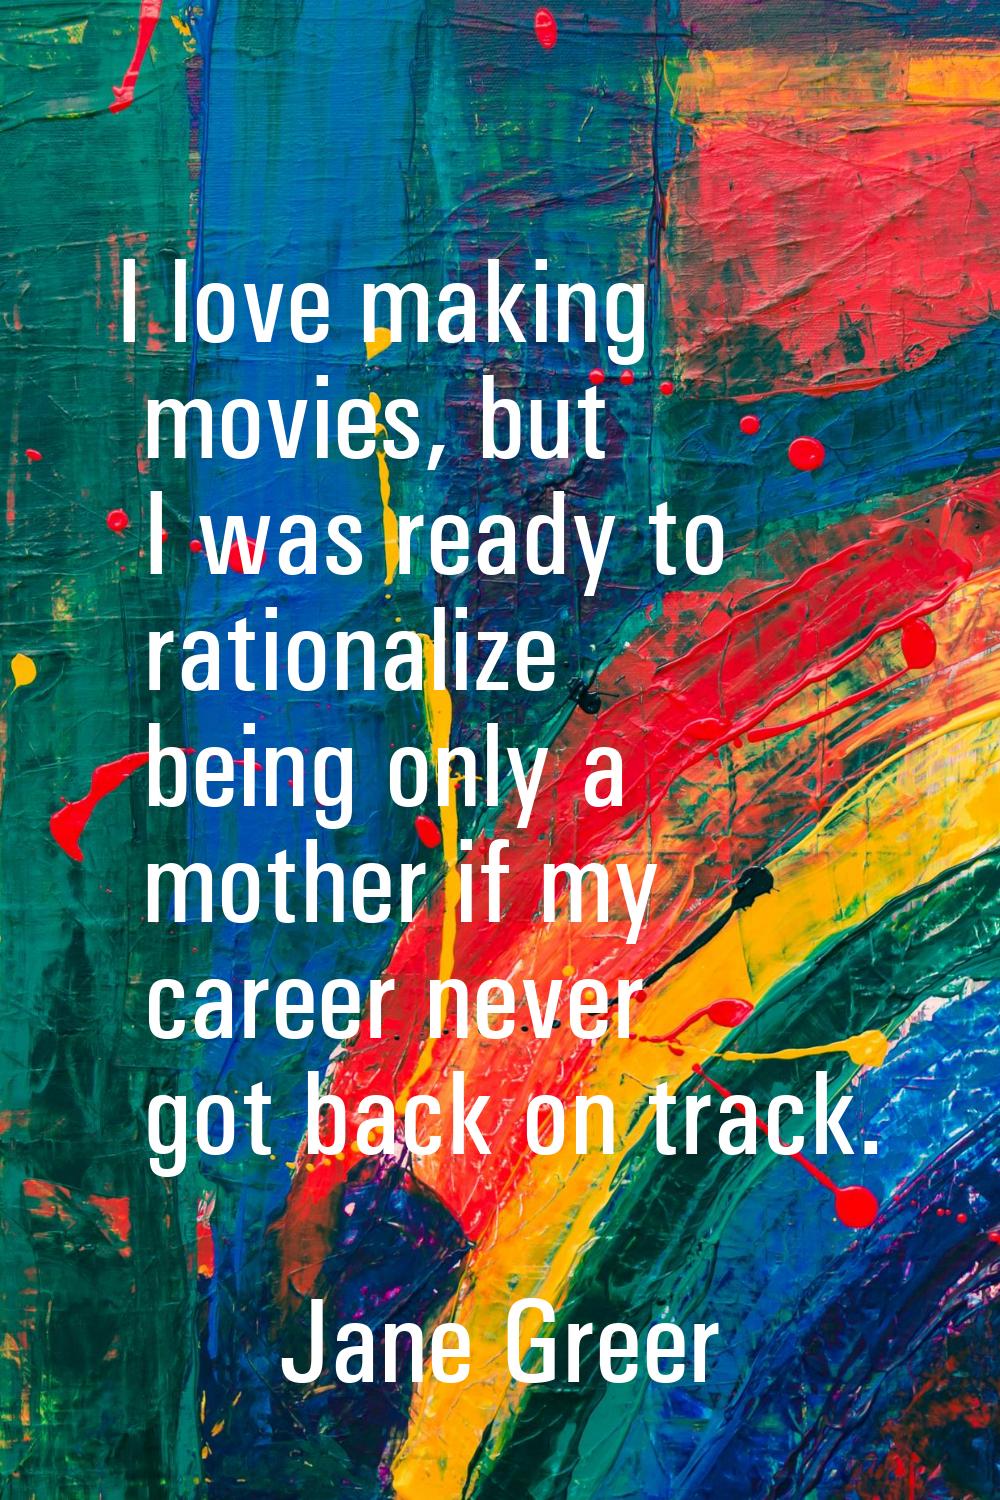 I love making movies, but I was ready to rationalize being only a mother if my career never got bac